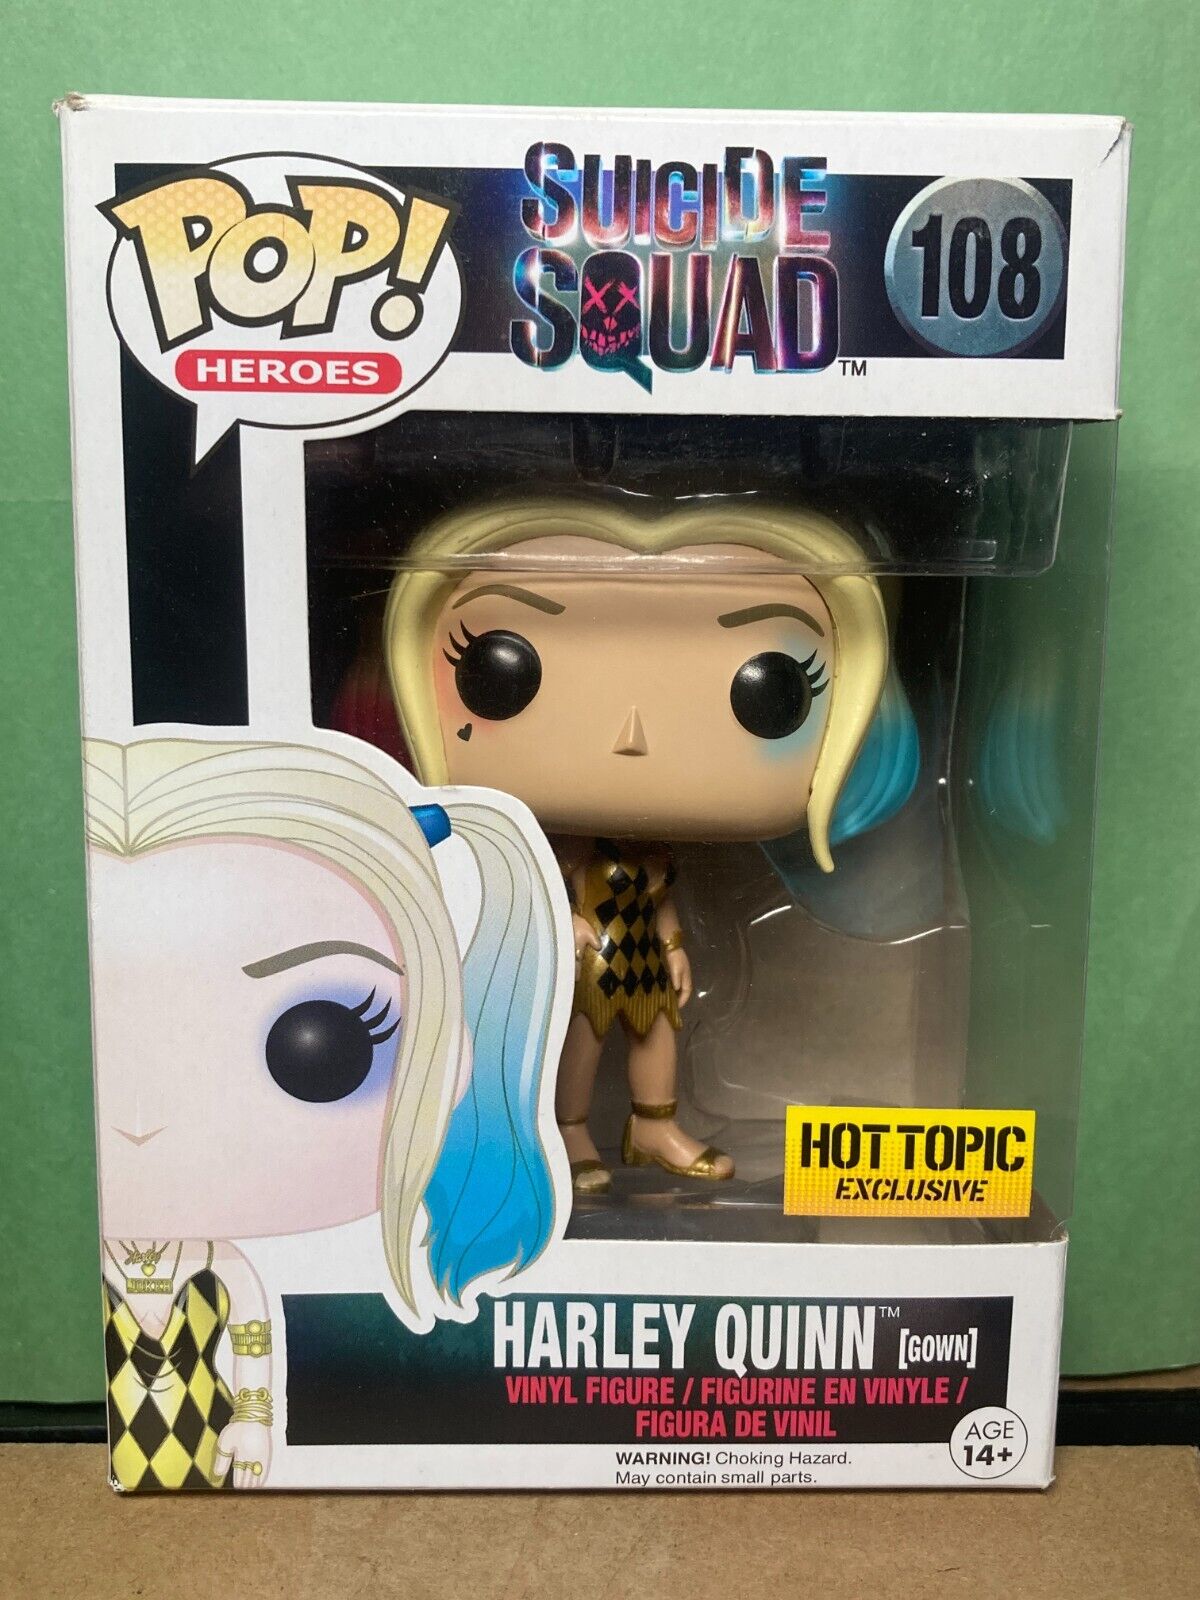 Funko POP Suicide Squad 108 Hot Topic Exclusive Harley Quinn Gown